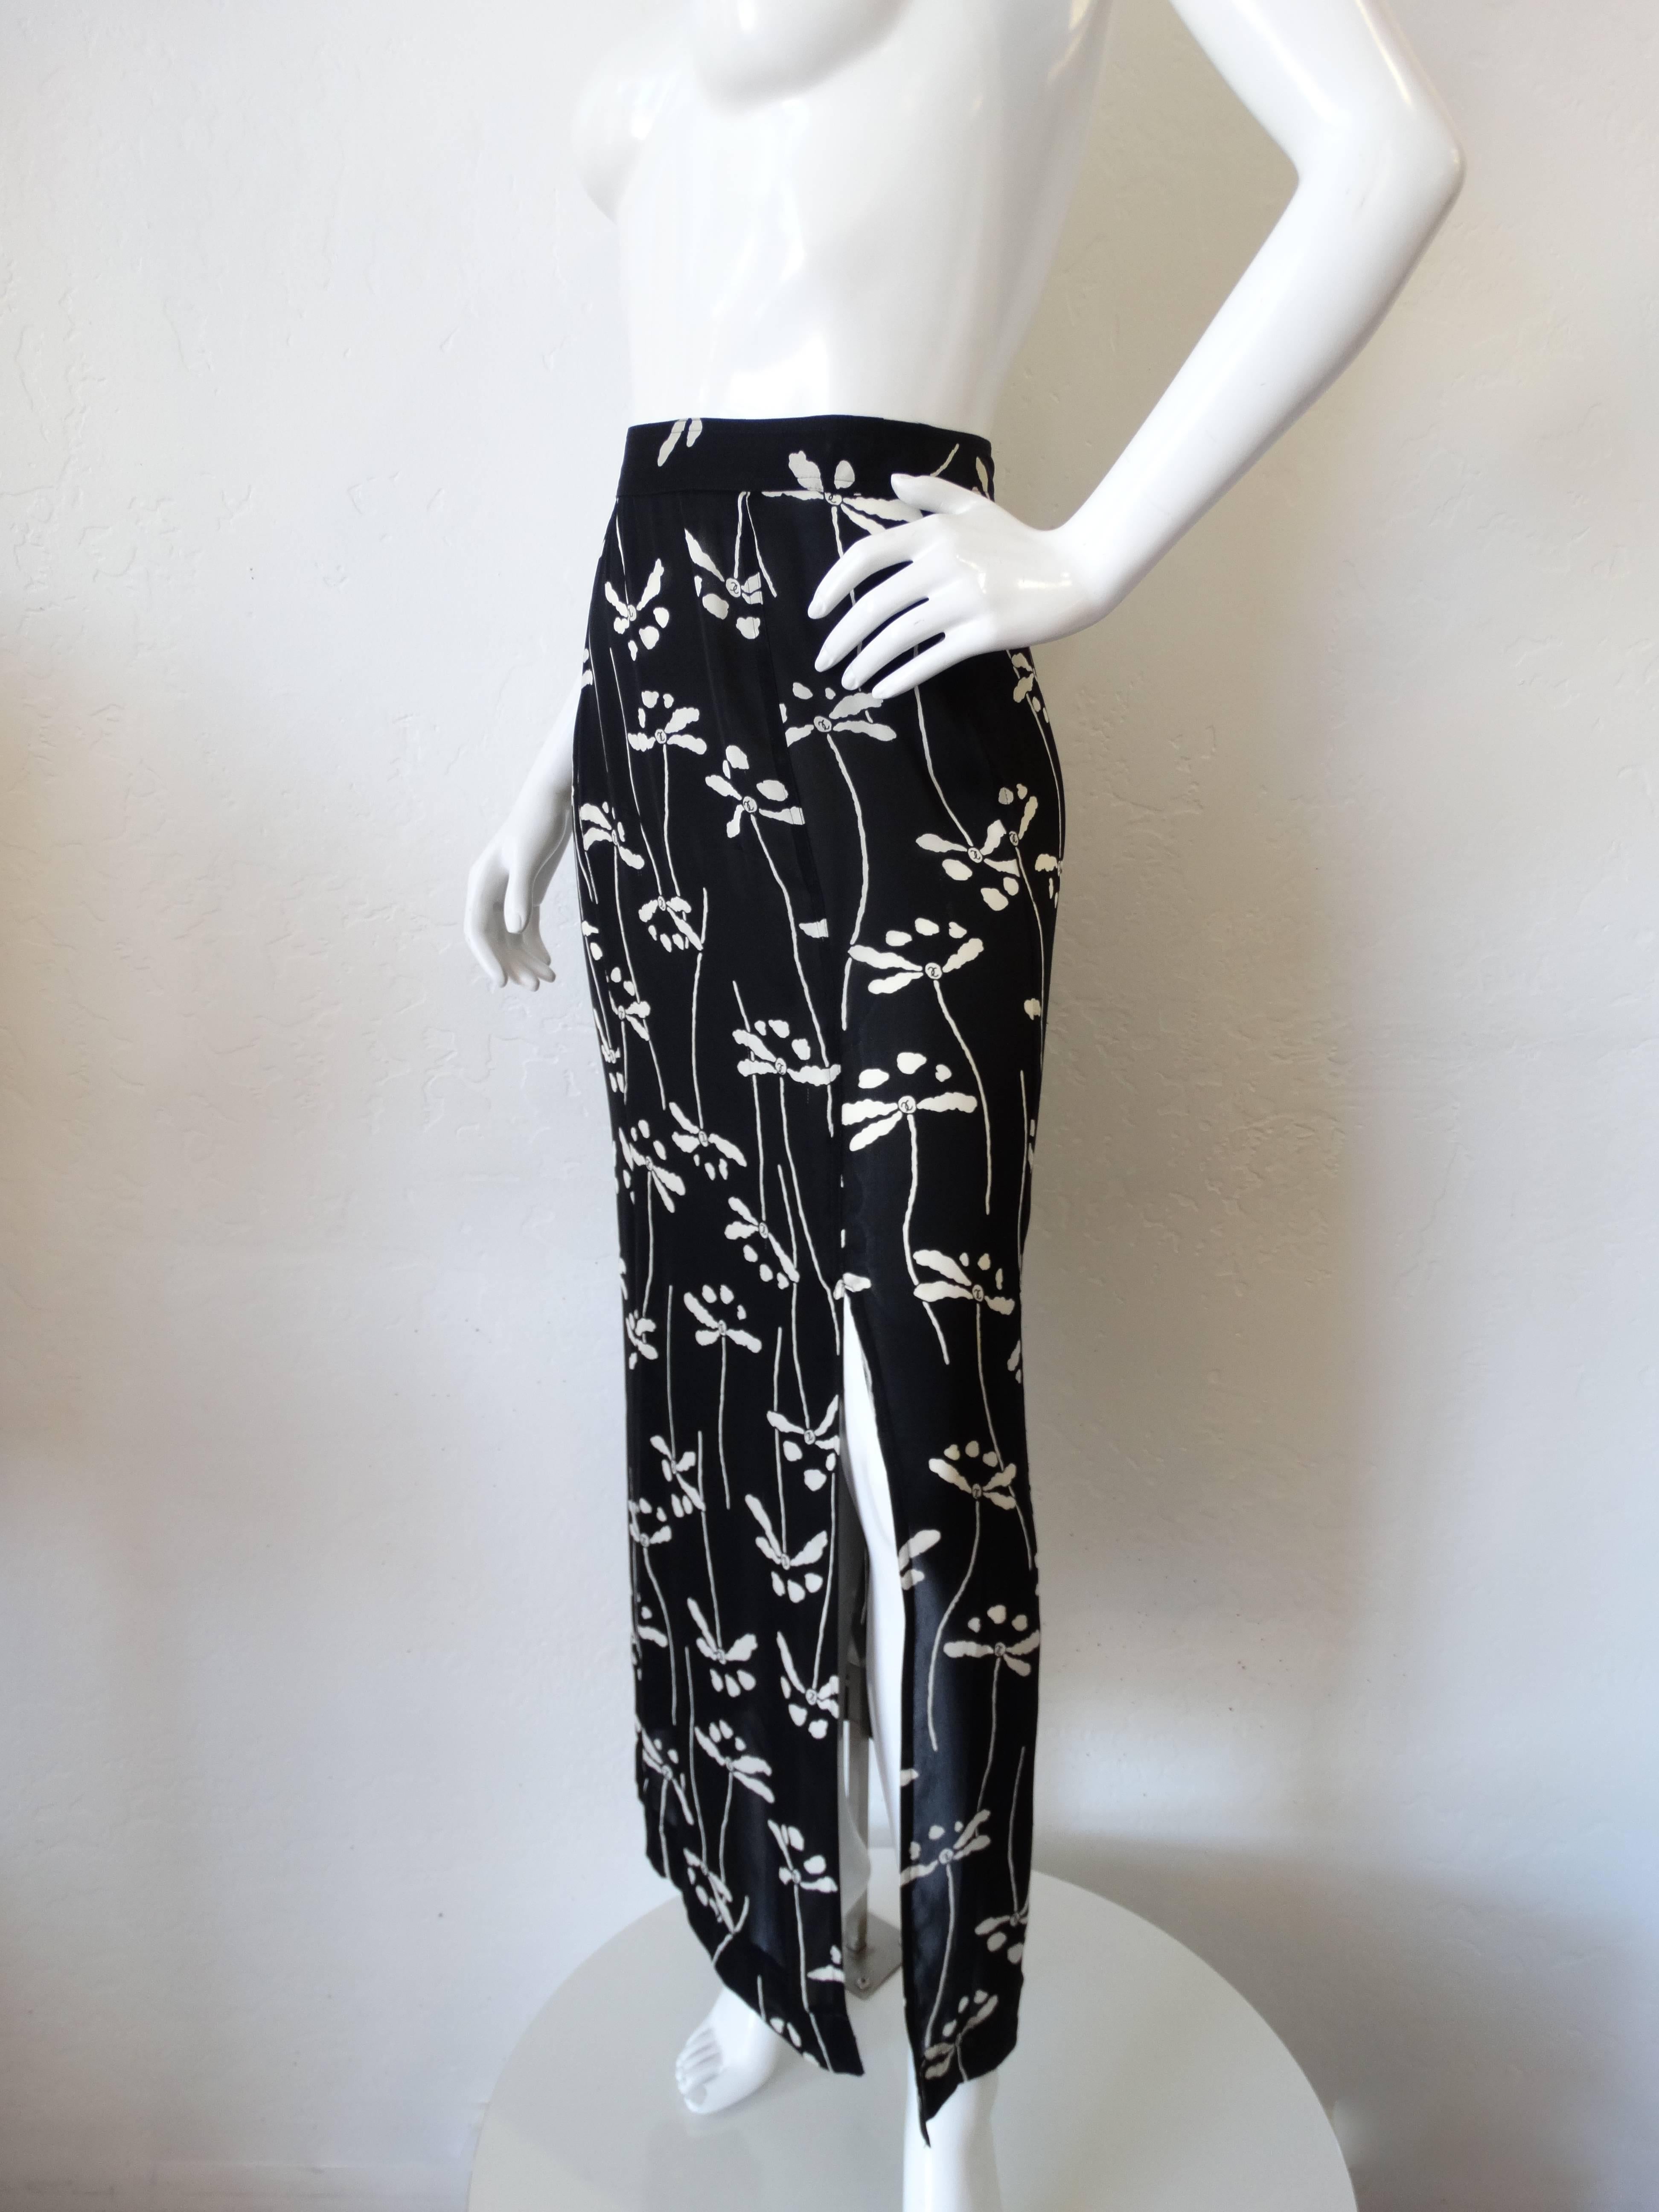 Rare 1990s Chanel Black and White Floral Skirt 1